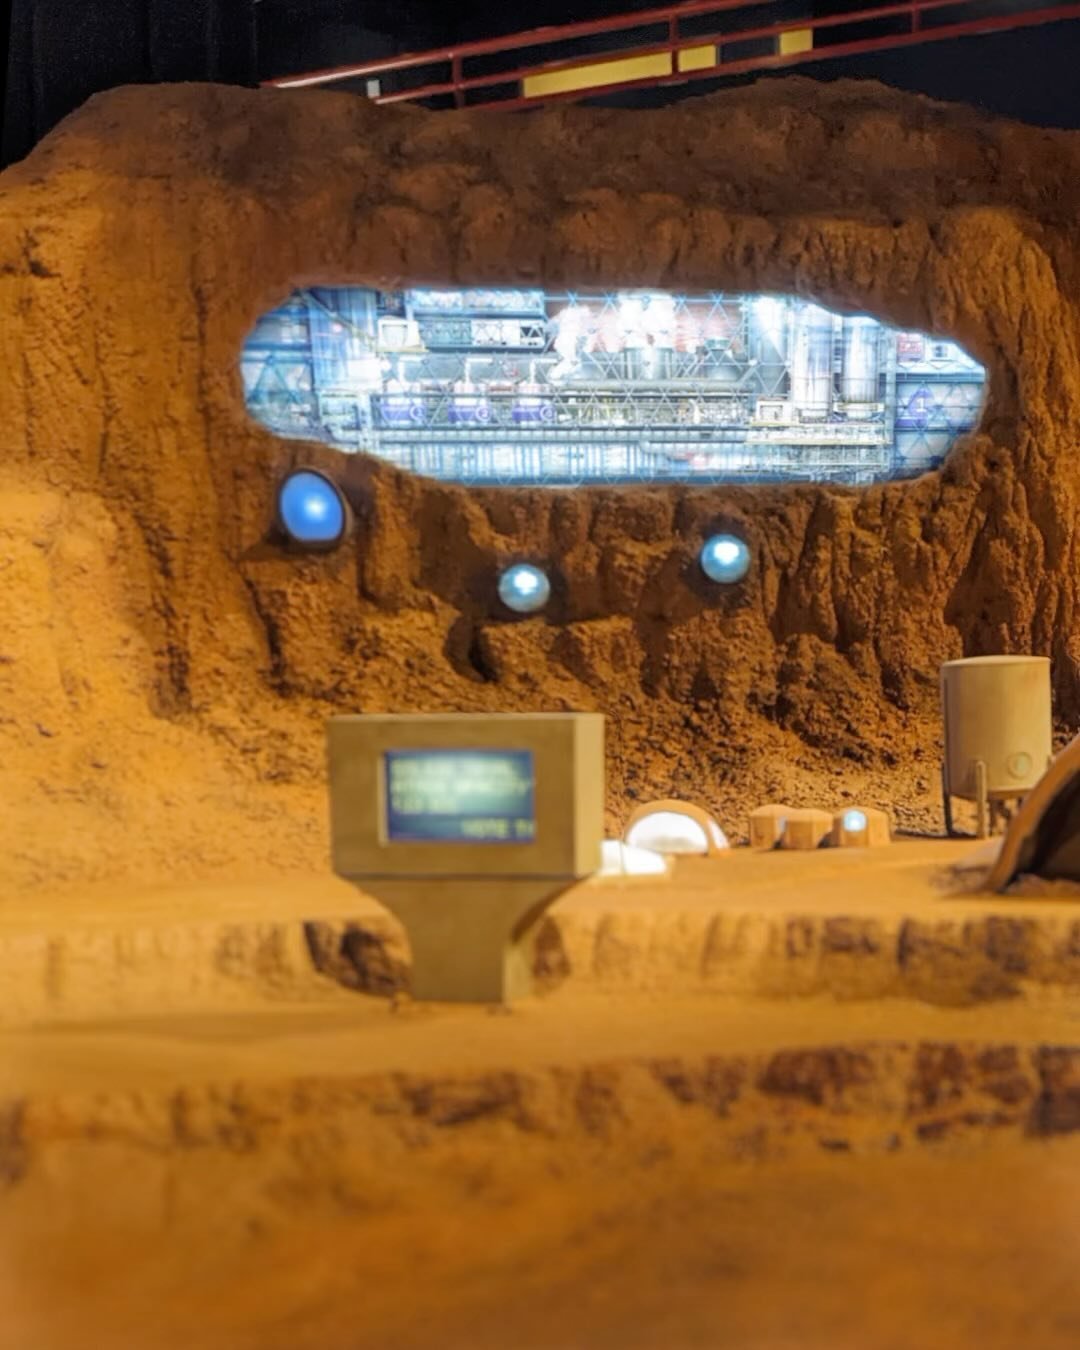 Got to nerd out working at RLMG on an interactive Martian model for the Carnegie Science Center. The embedded monitors act as windows and signage, giving a glimpse inside a rich animated world of the Martian settlement. Visitors vote on changes to th